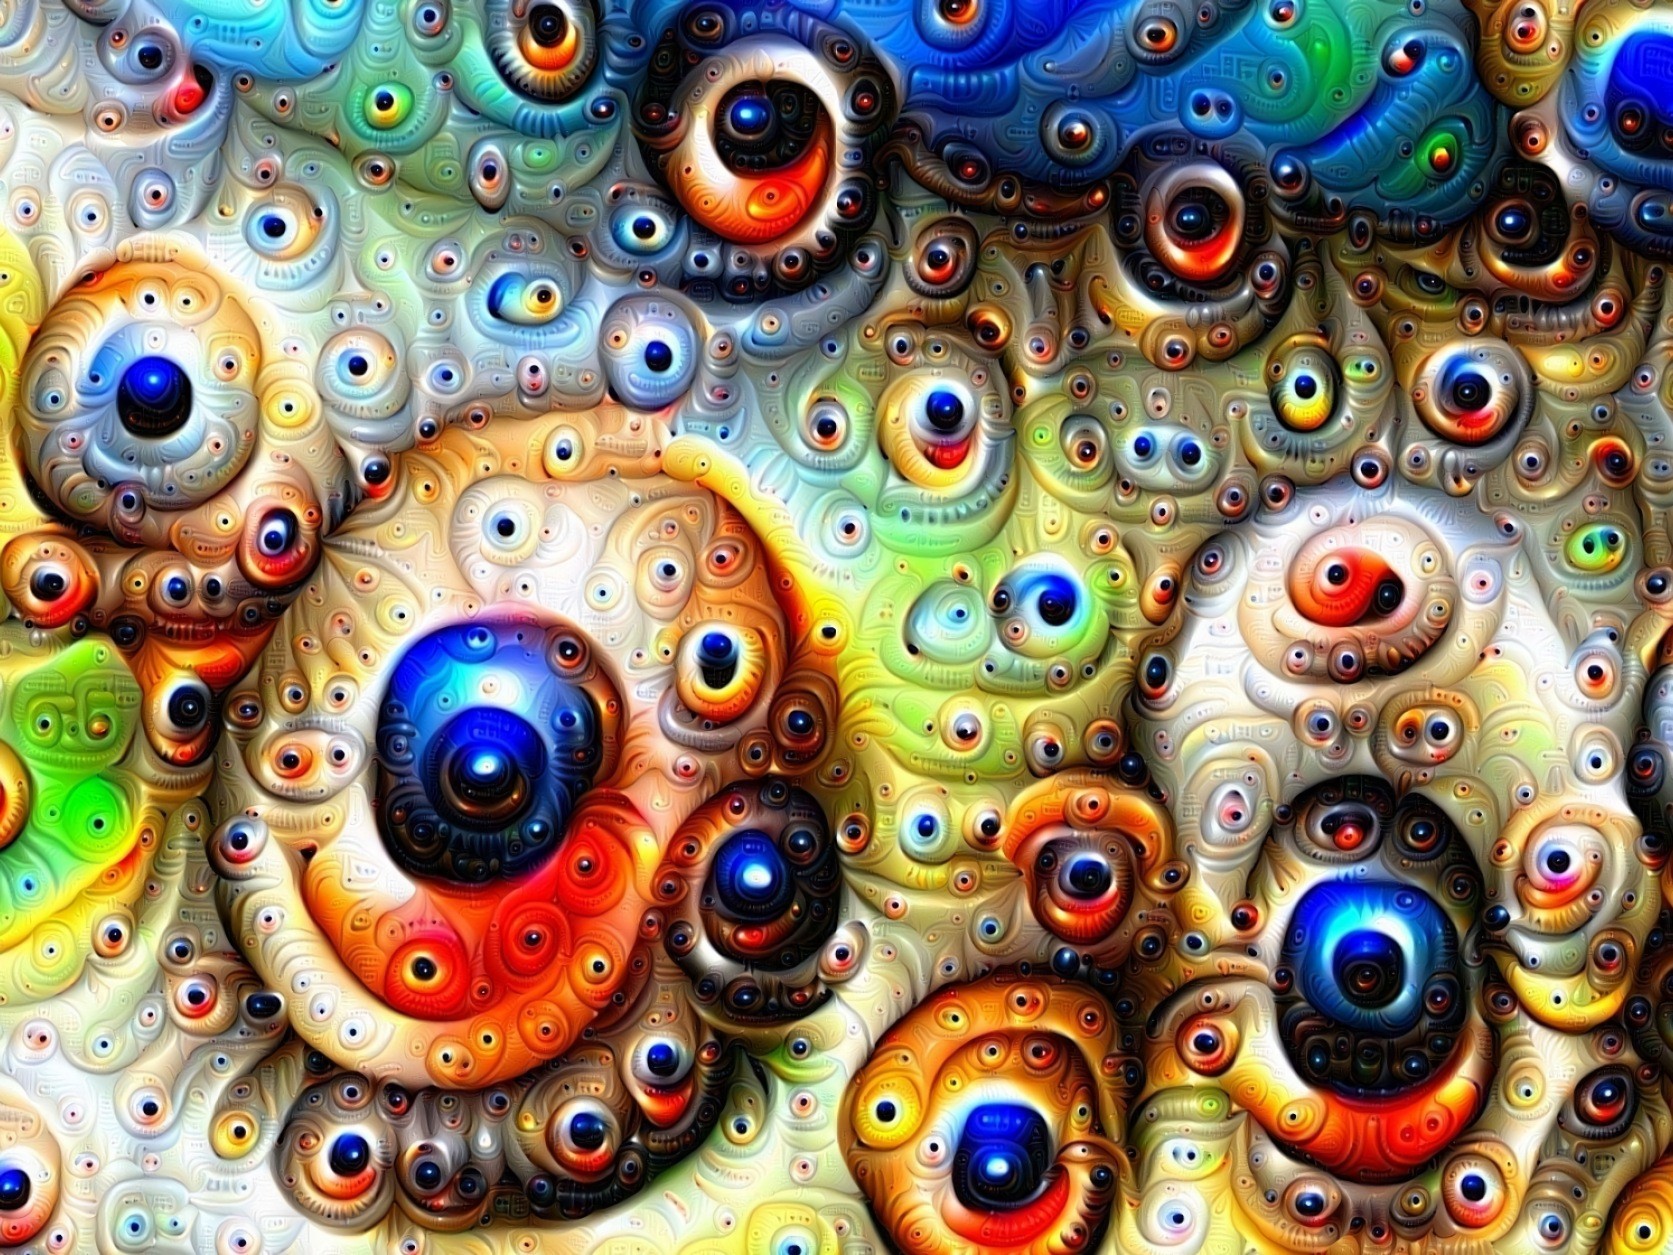 Level 9 Rare Dream. 111 times in Deep Dream Neural Level 6- Low- Shallow.